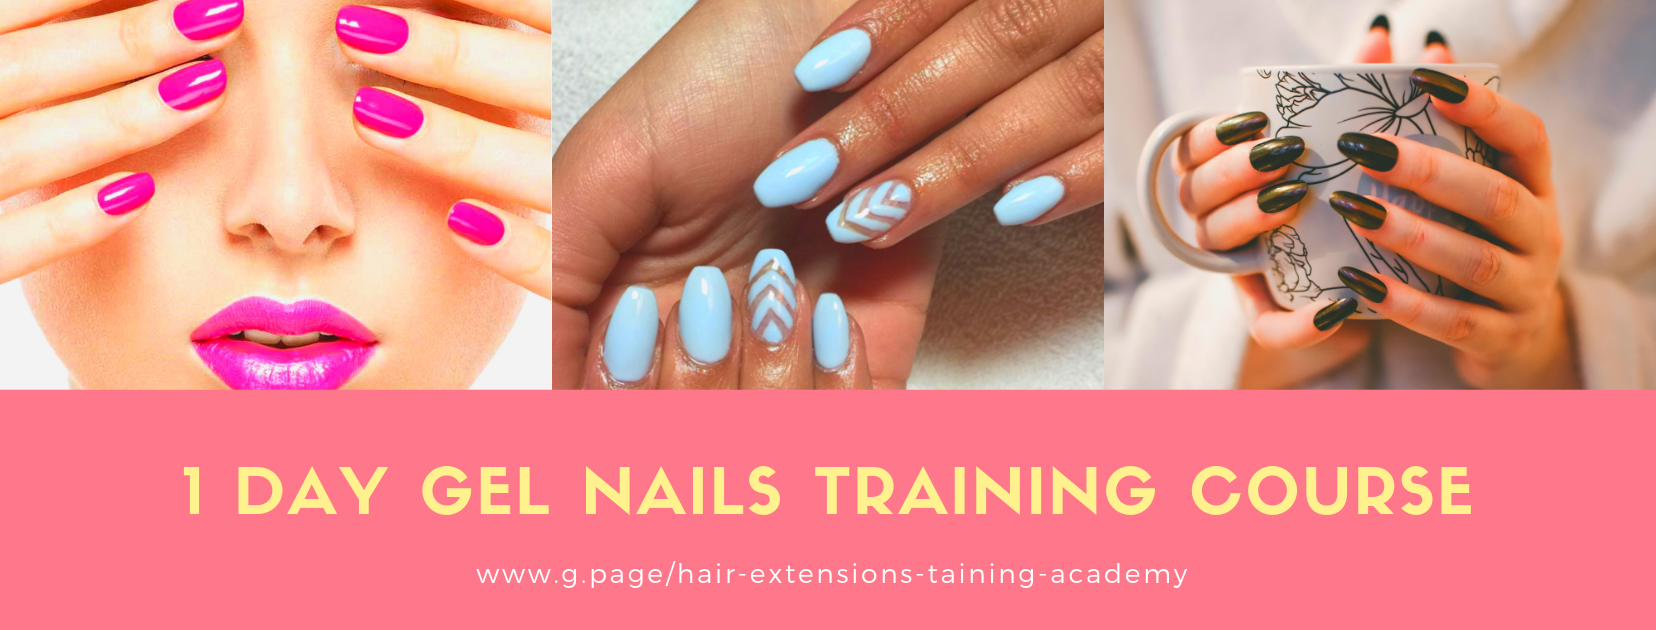 How to Start a Gel Nail Business after Qualifying